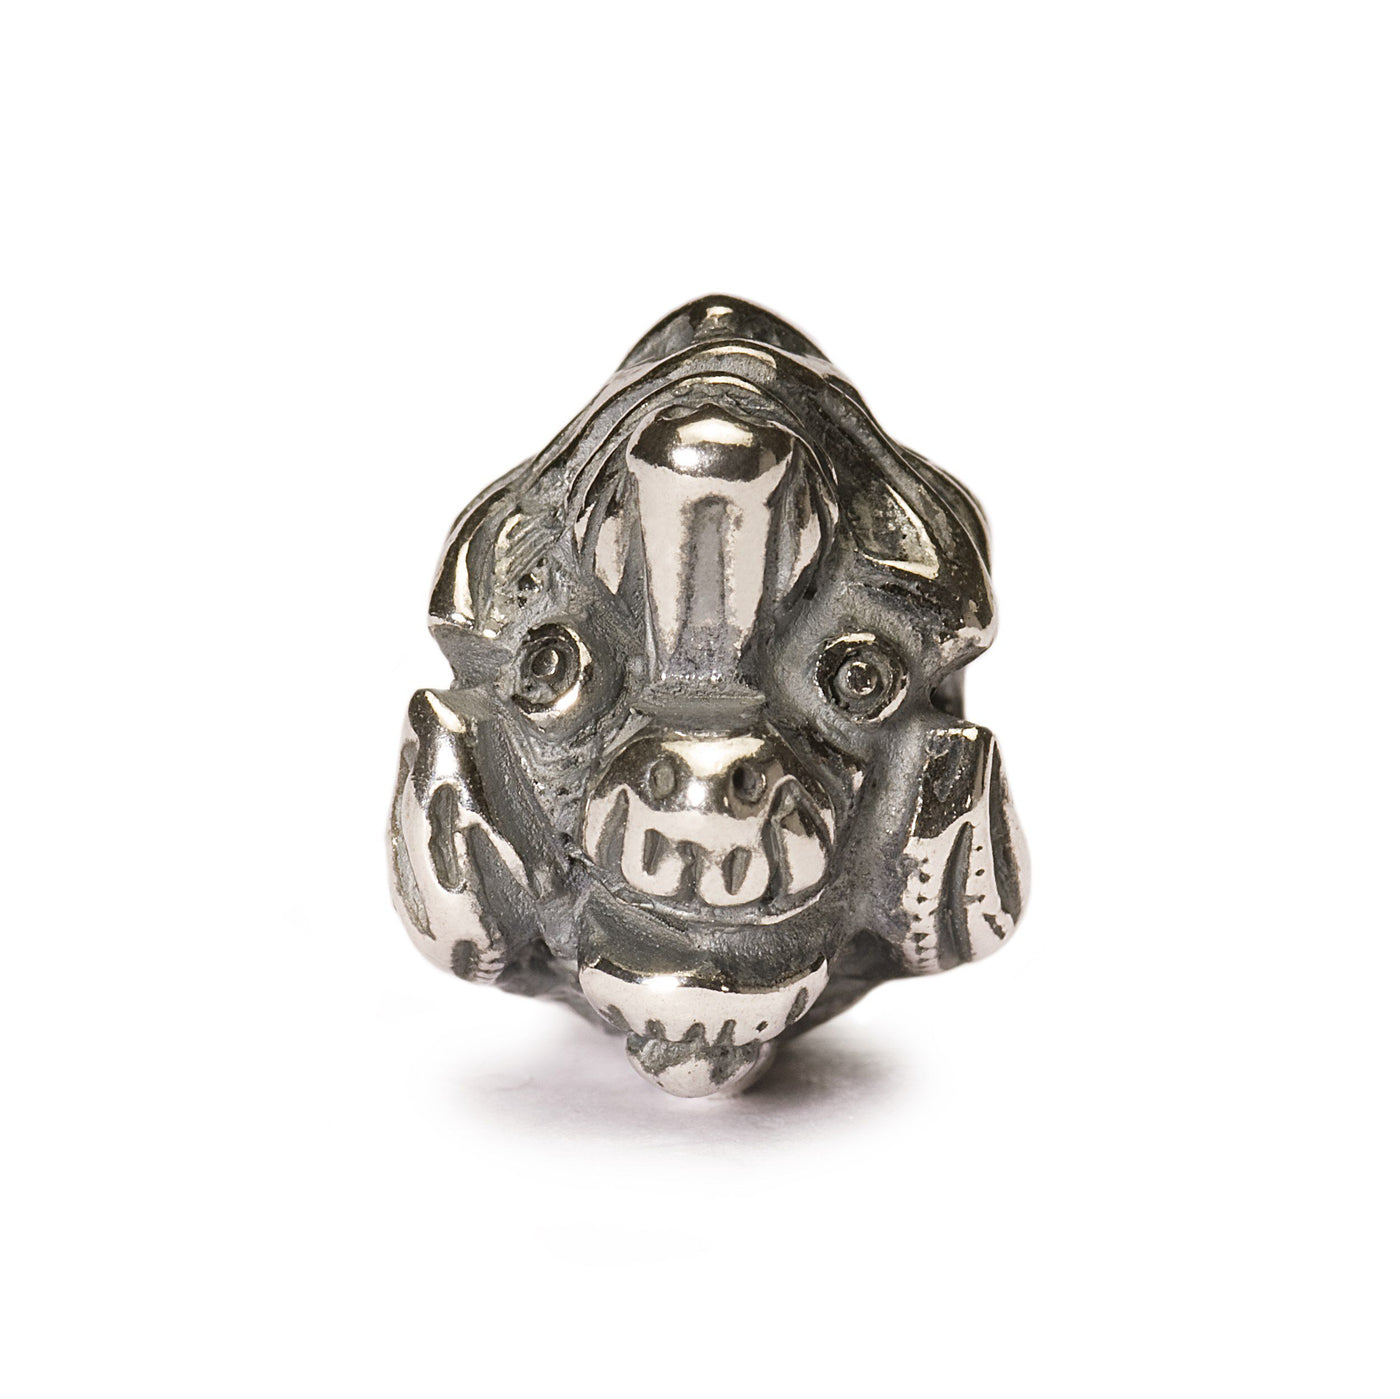 Find-your-pet - Trollbeads Canada